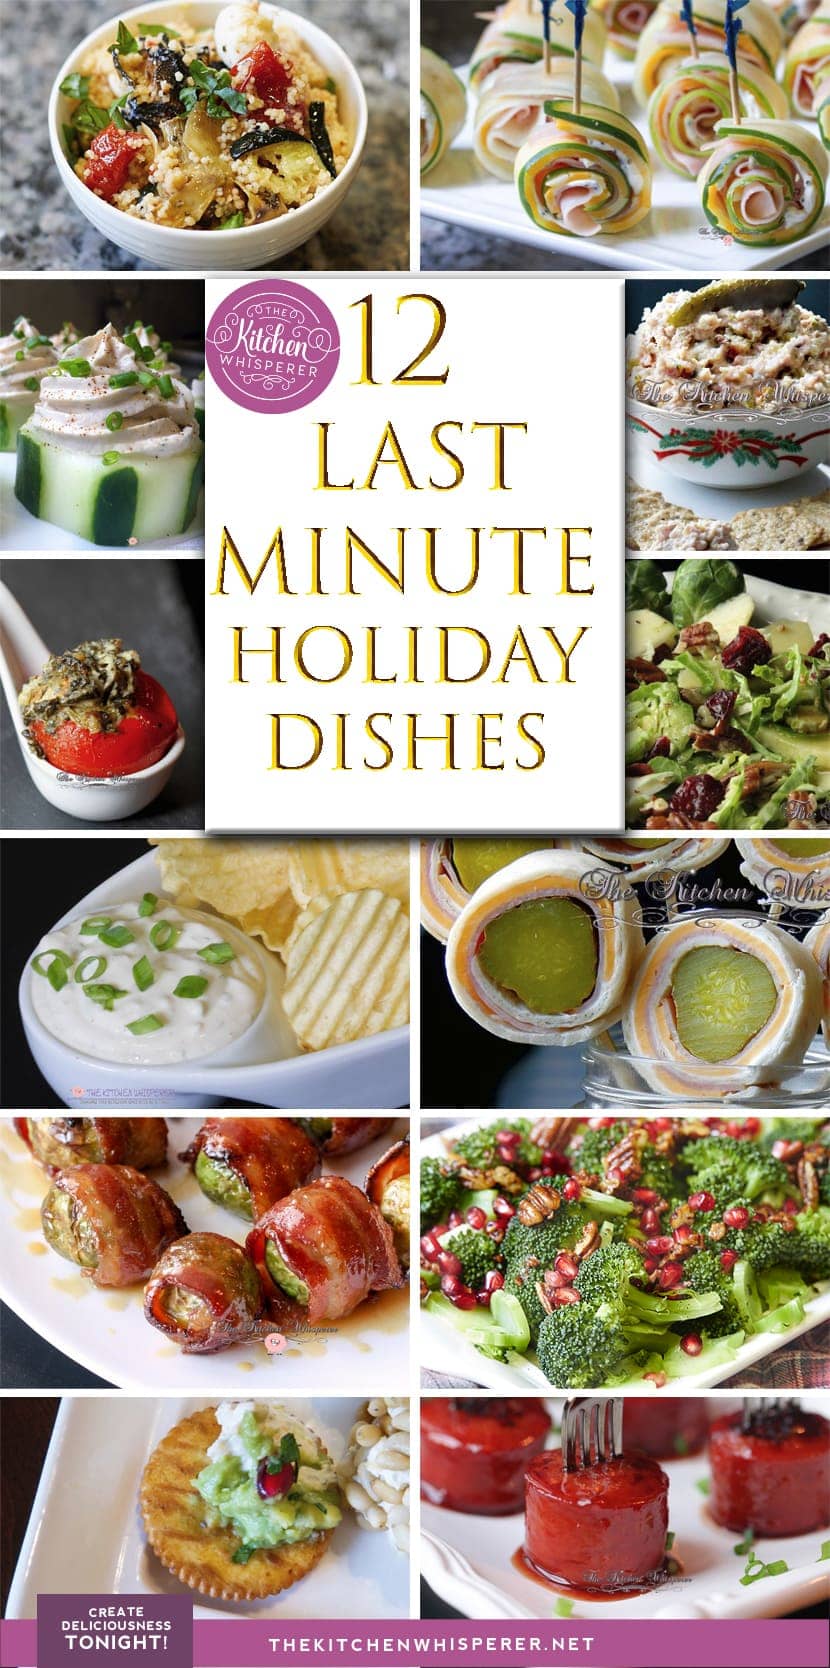 12 last minute holiday dishes!